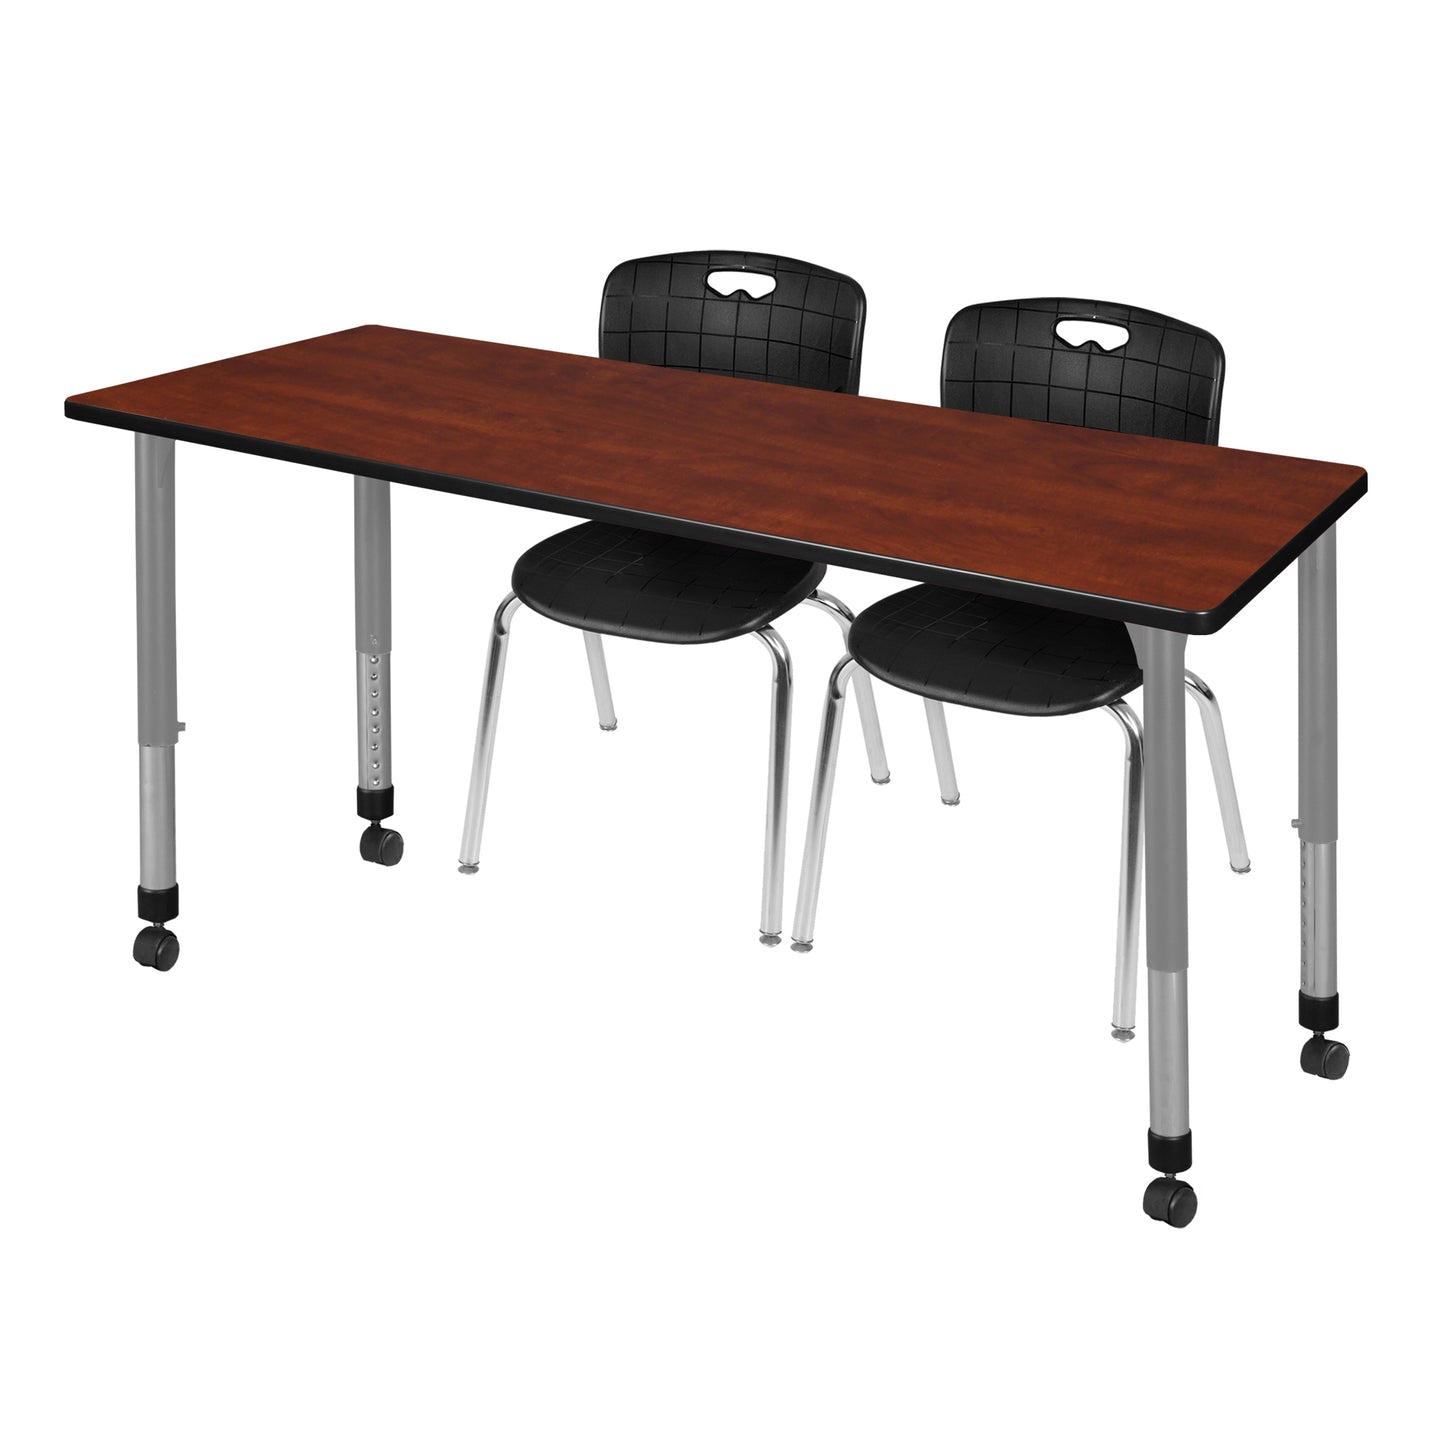 Regency Kee 66 x 24 in. Adjustable Classroom Table & 2 Andy 18 in. Stack Chairs